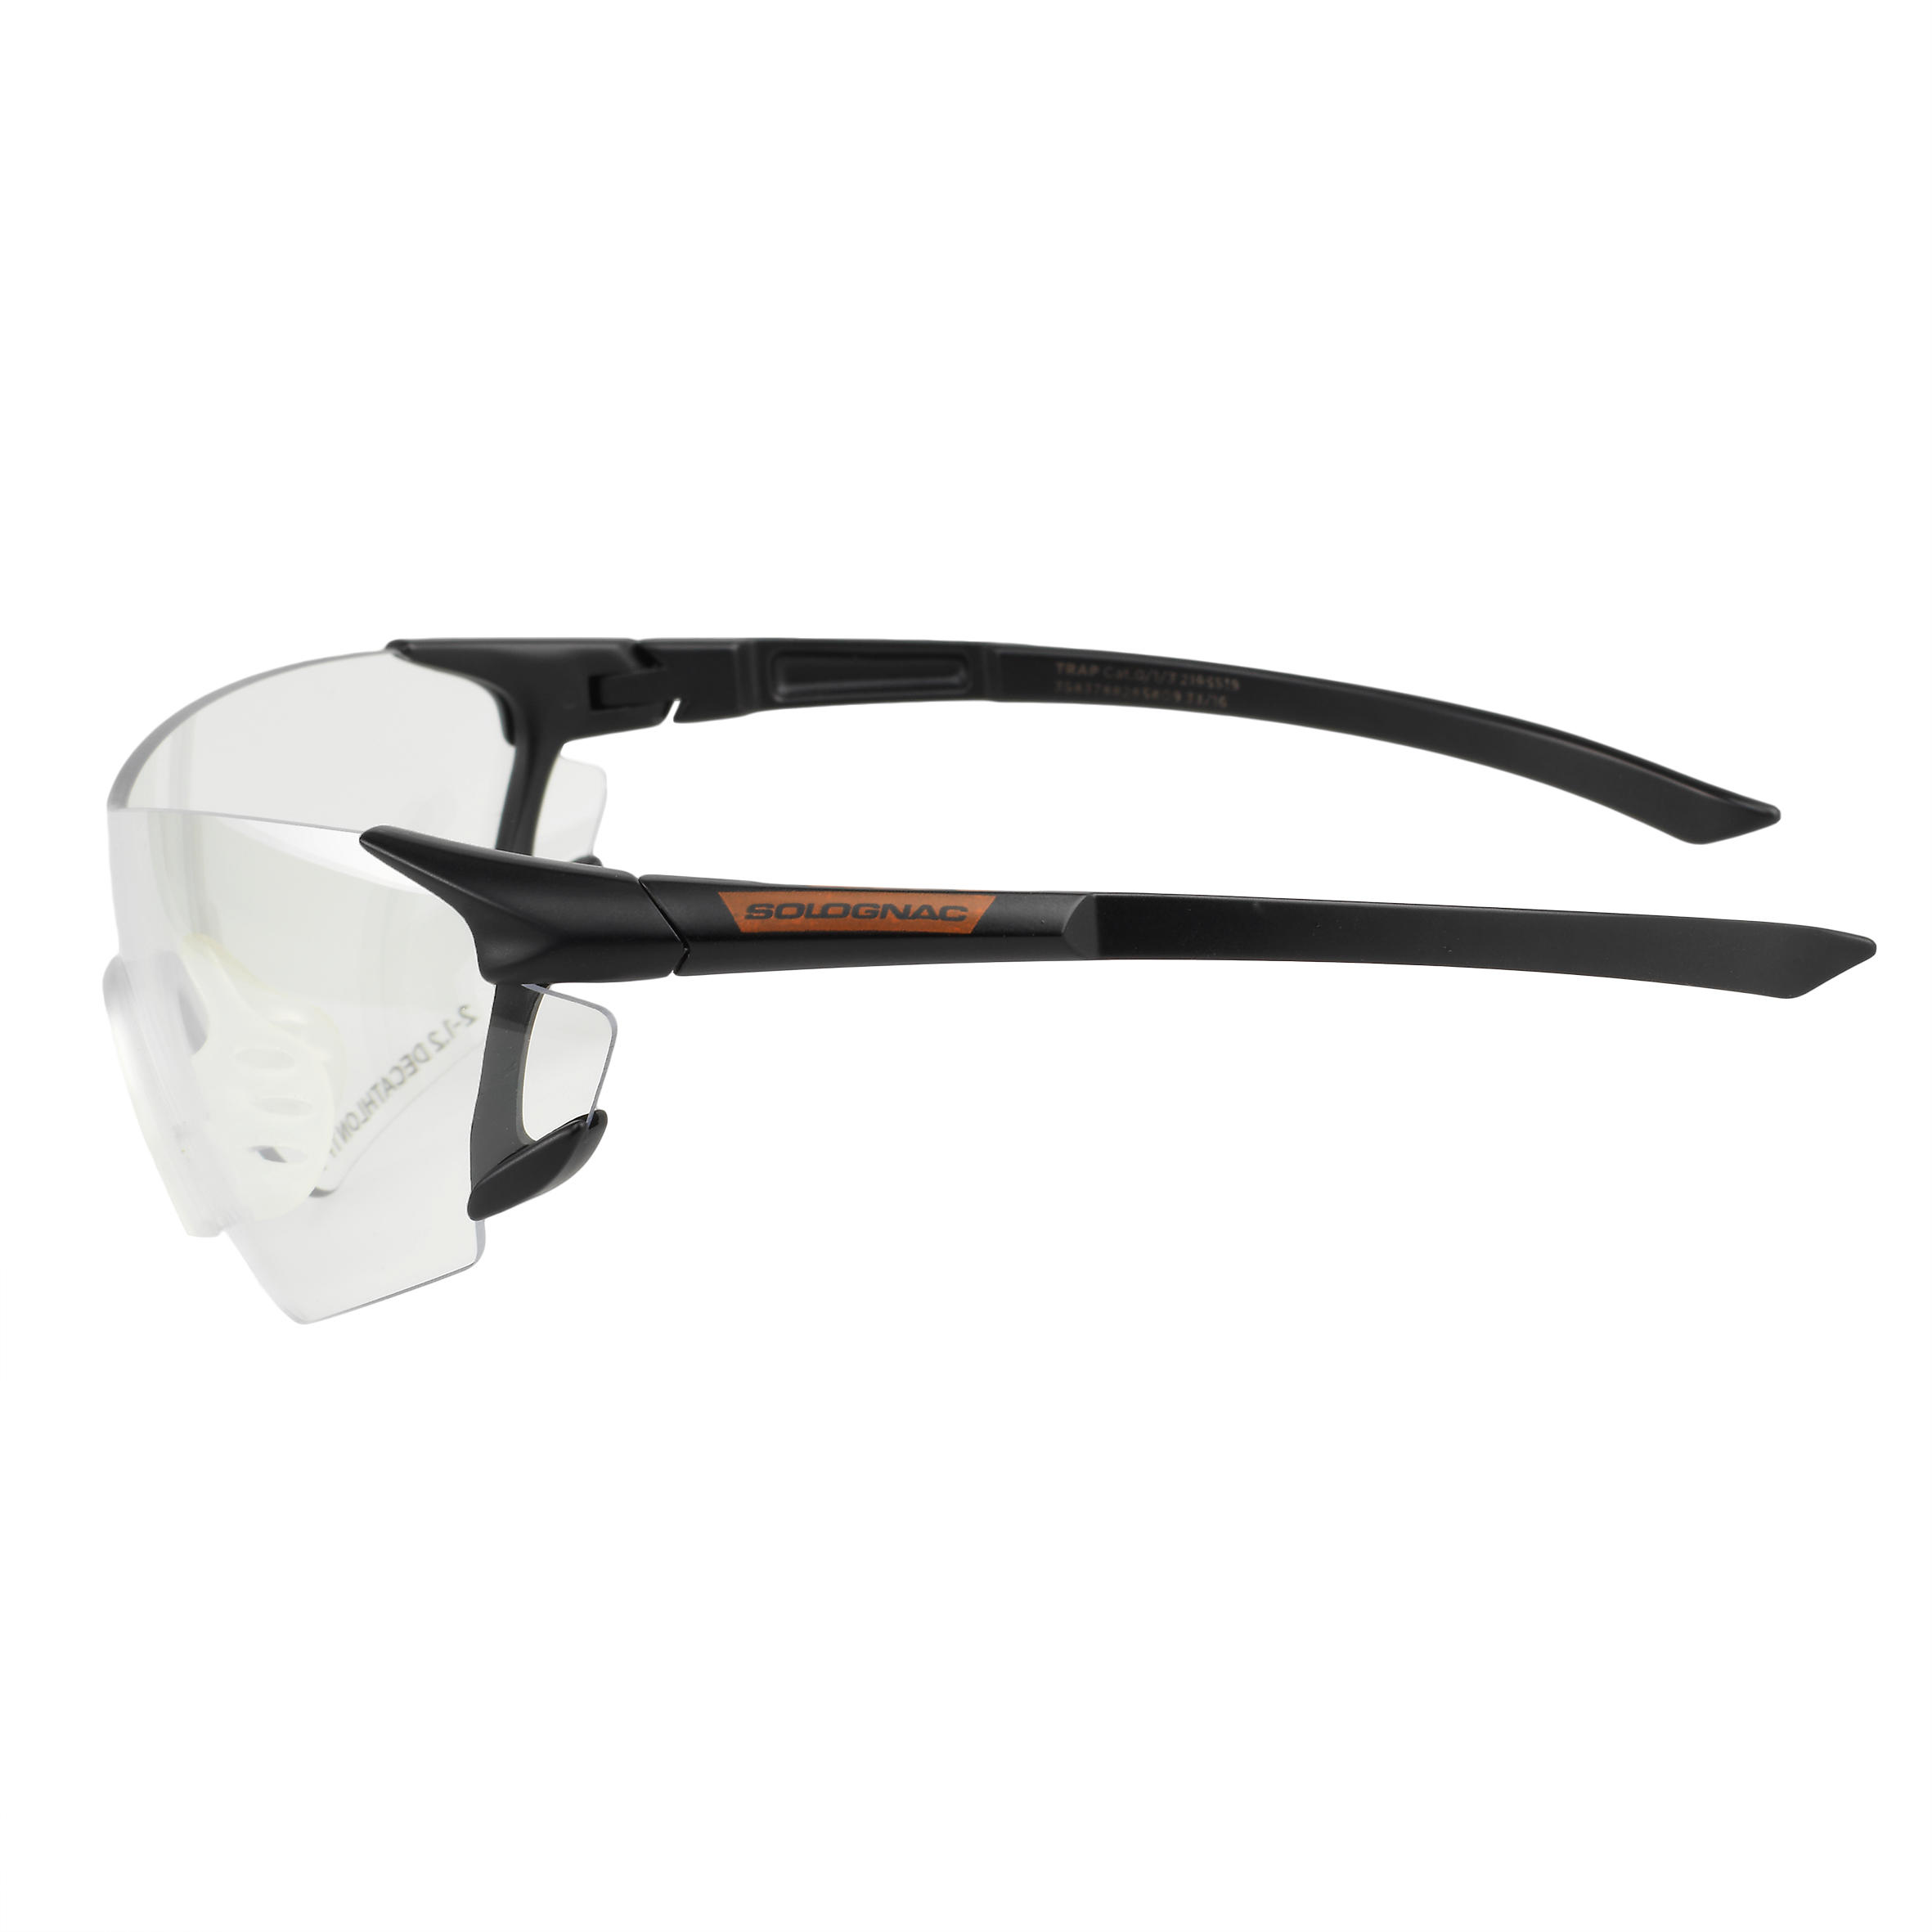 CLAY PIGEON SHOOTING PROTECTIVE GLASSES 100, PLAIN STRONG LENSES, CATEGORY 0 3/3